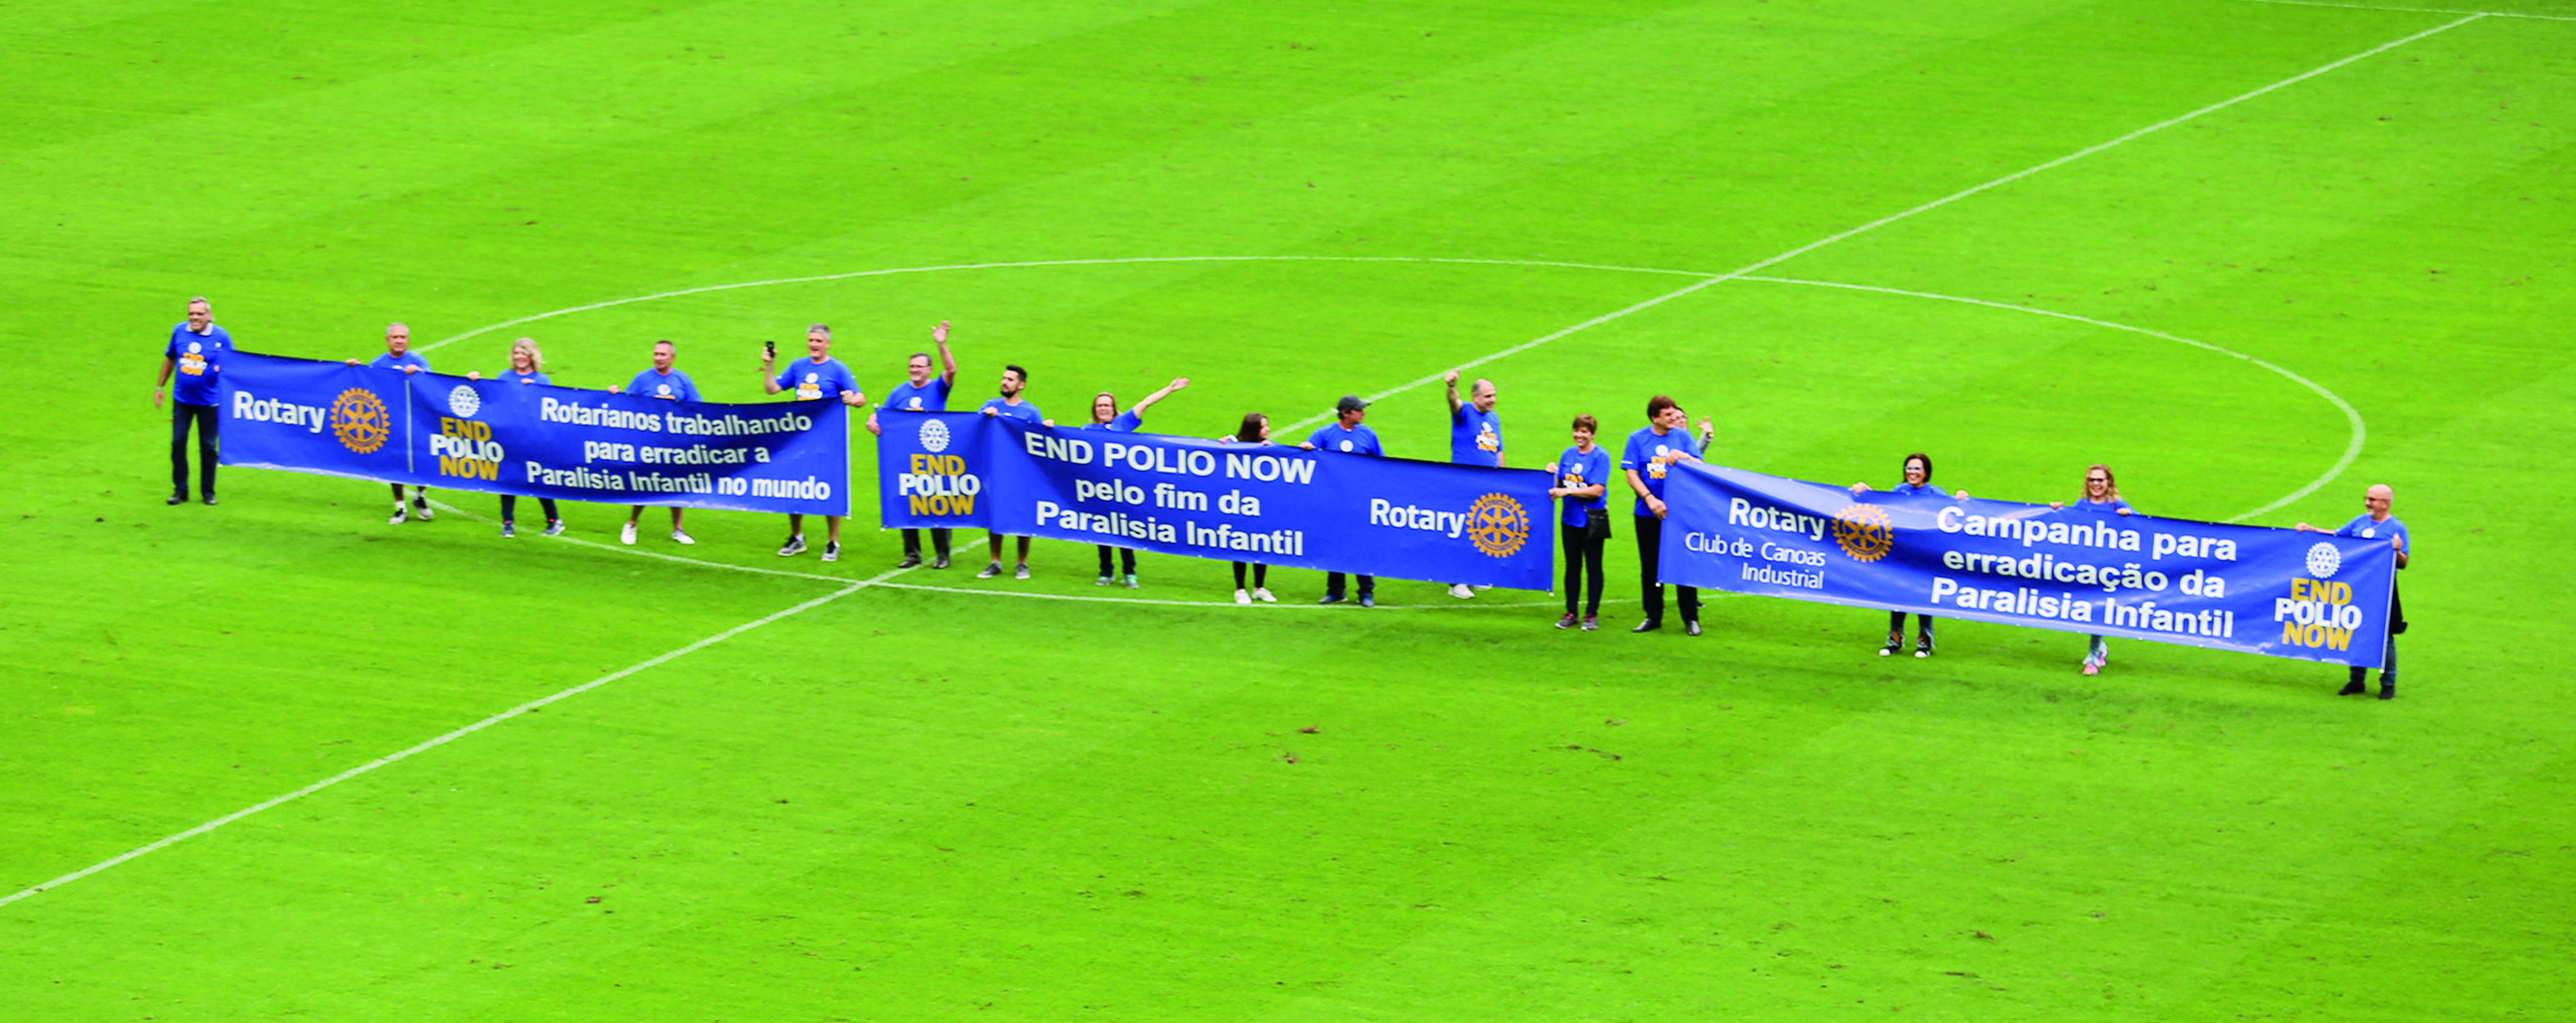 Rotary members in District 4670 carried an End Polio banner out on a football field.